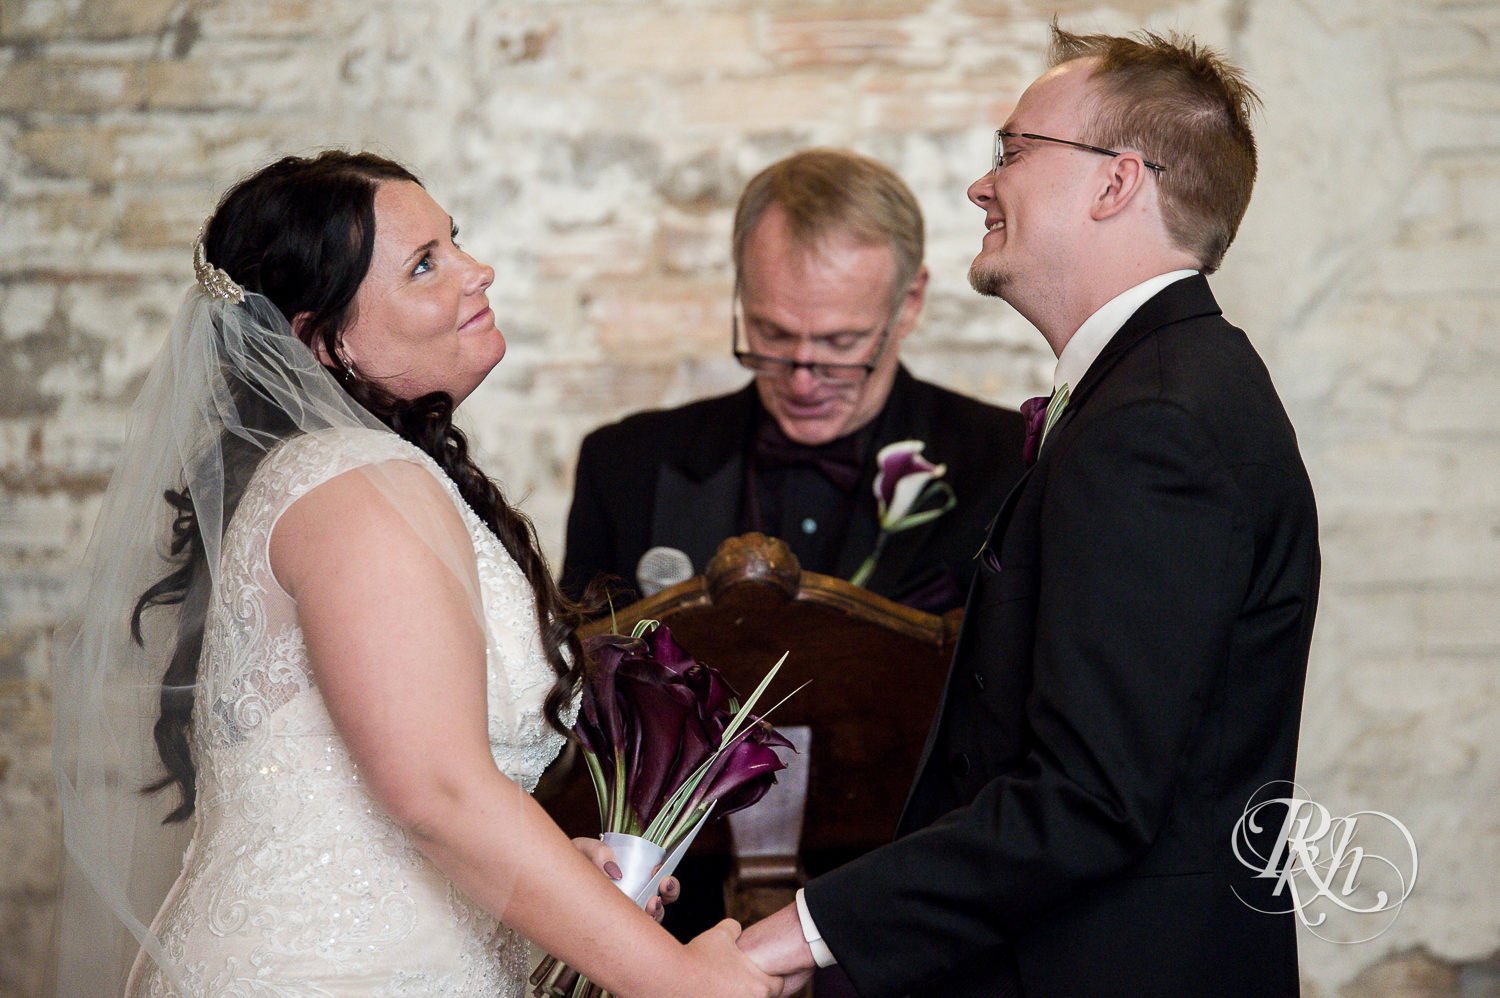 Bride and groom smile during indoor wedding ceremony at Kellerman's Event Center in White Bear Lake, Minnesota.